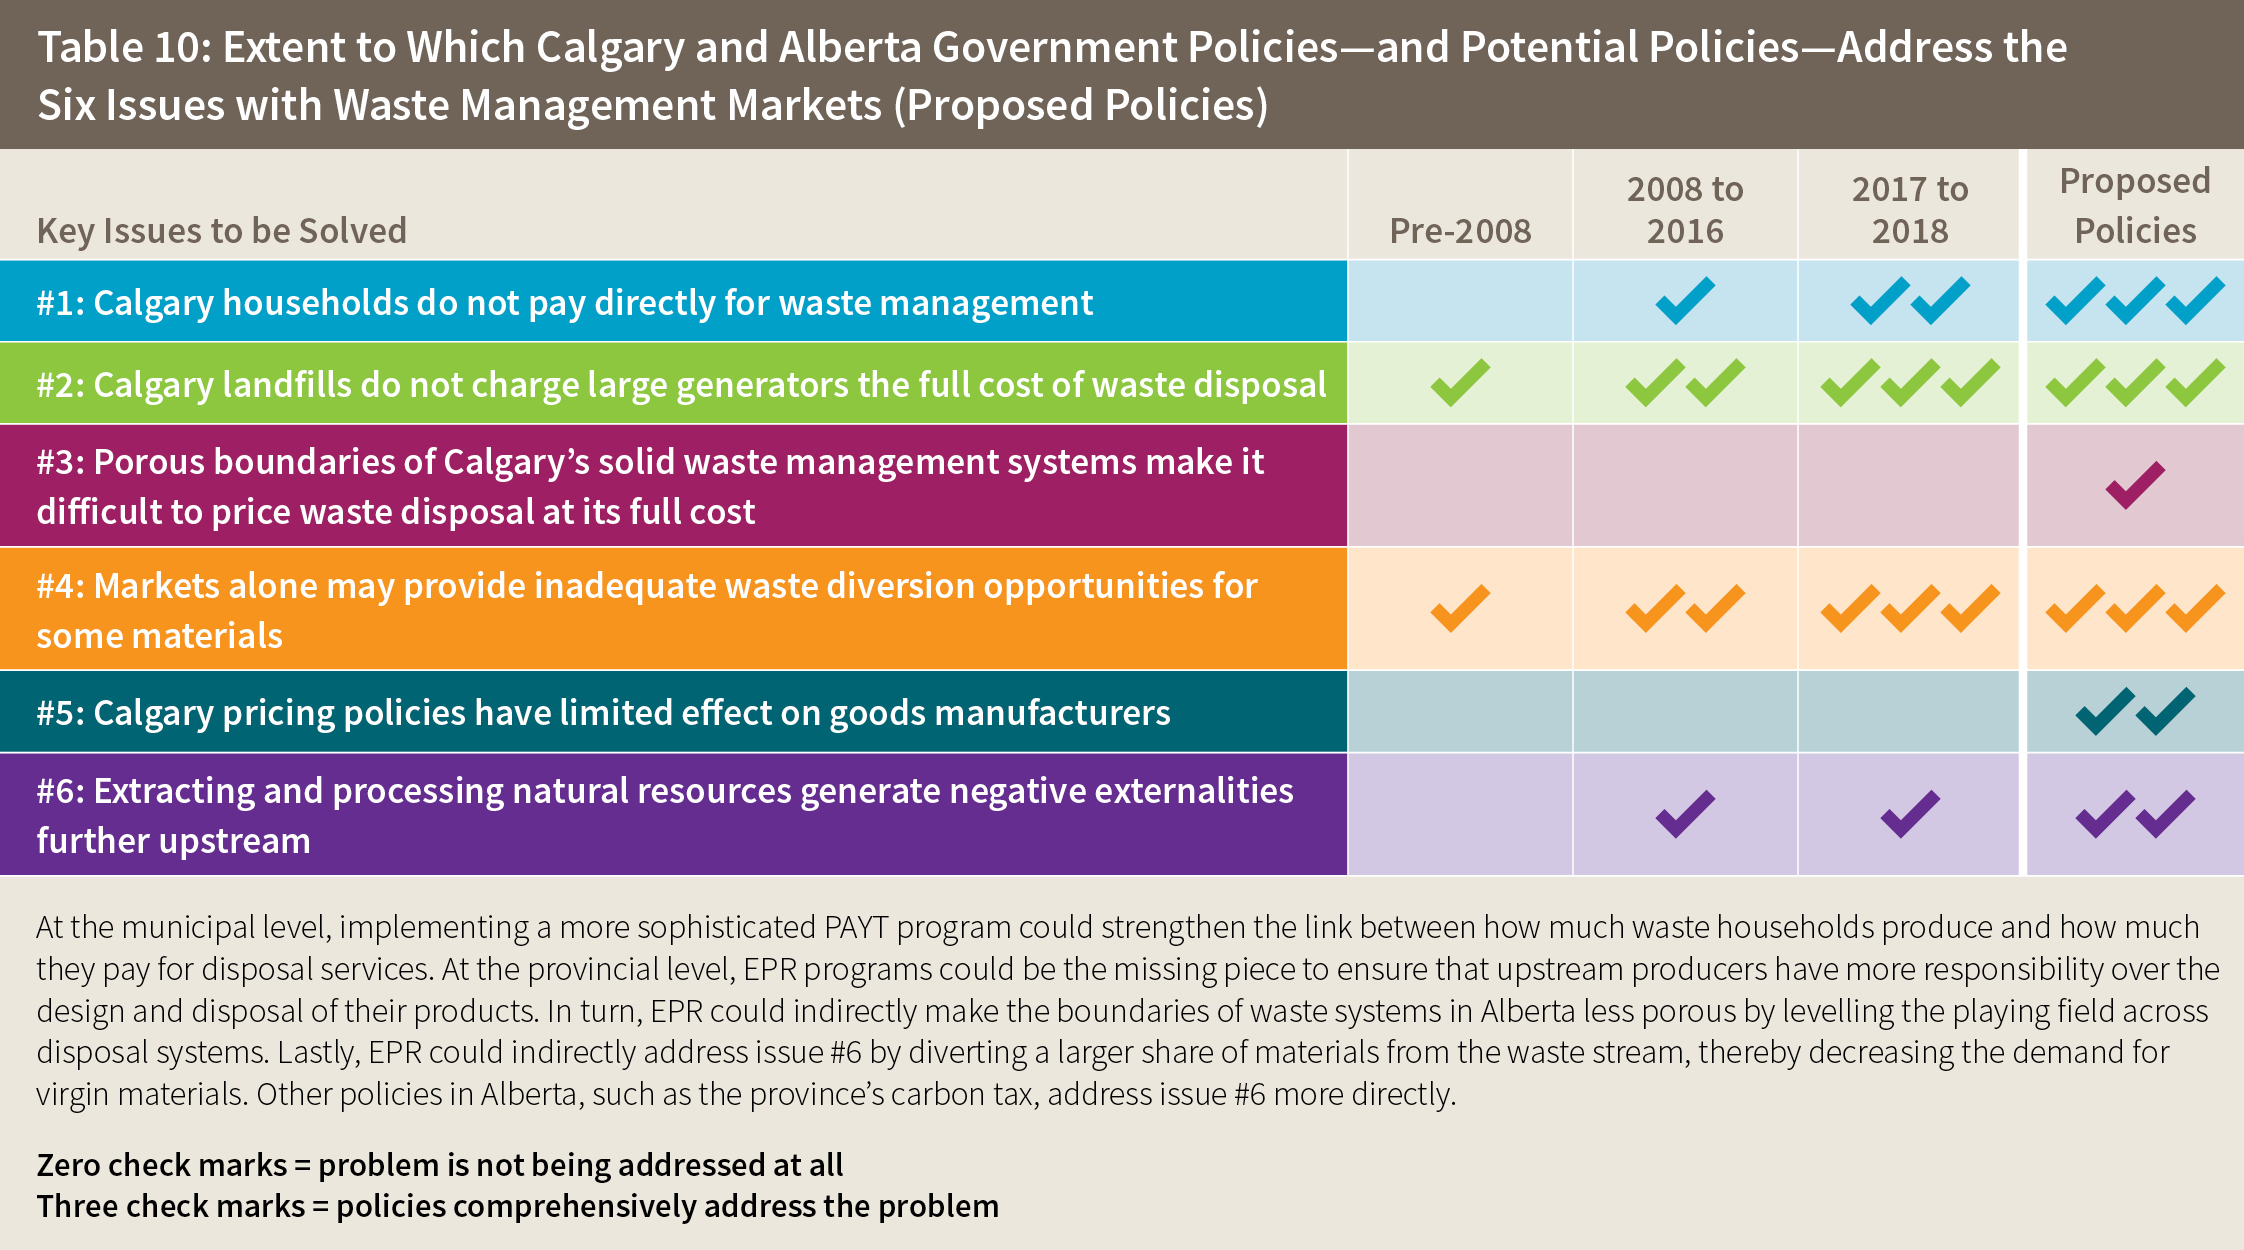 Table 10: Extent to Which Calgary and Alberta Government Policies—and Potential Policies—Address the Six Issues with Waste Management Markets (Proposed Policies)